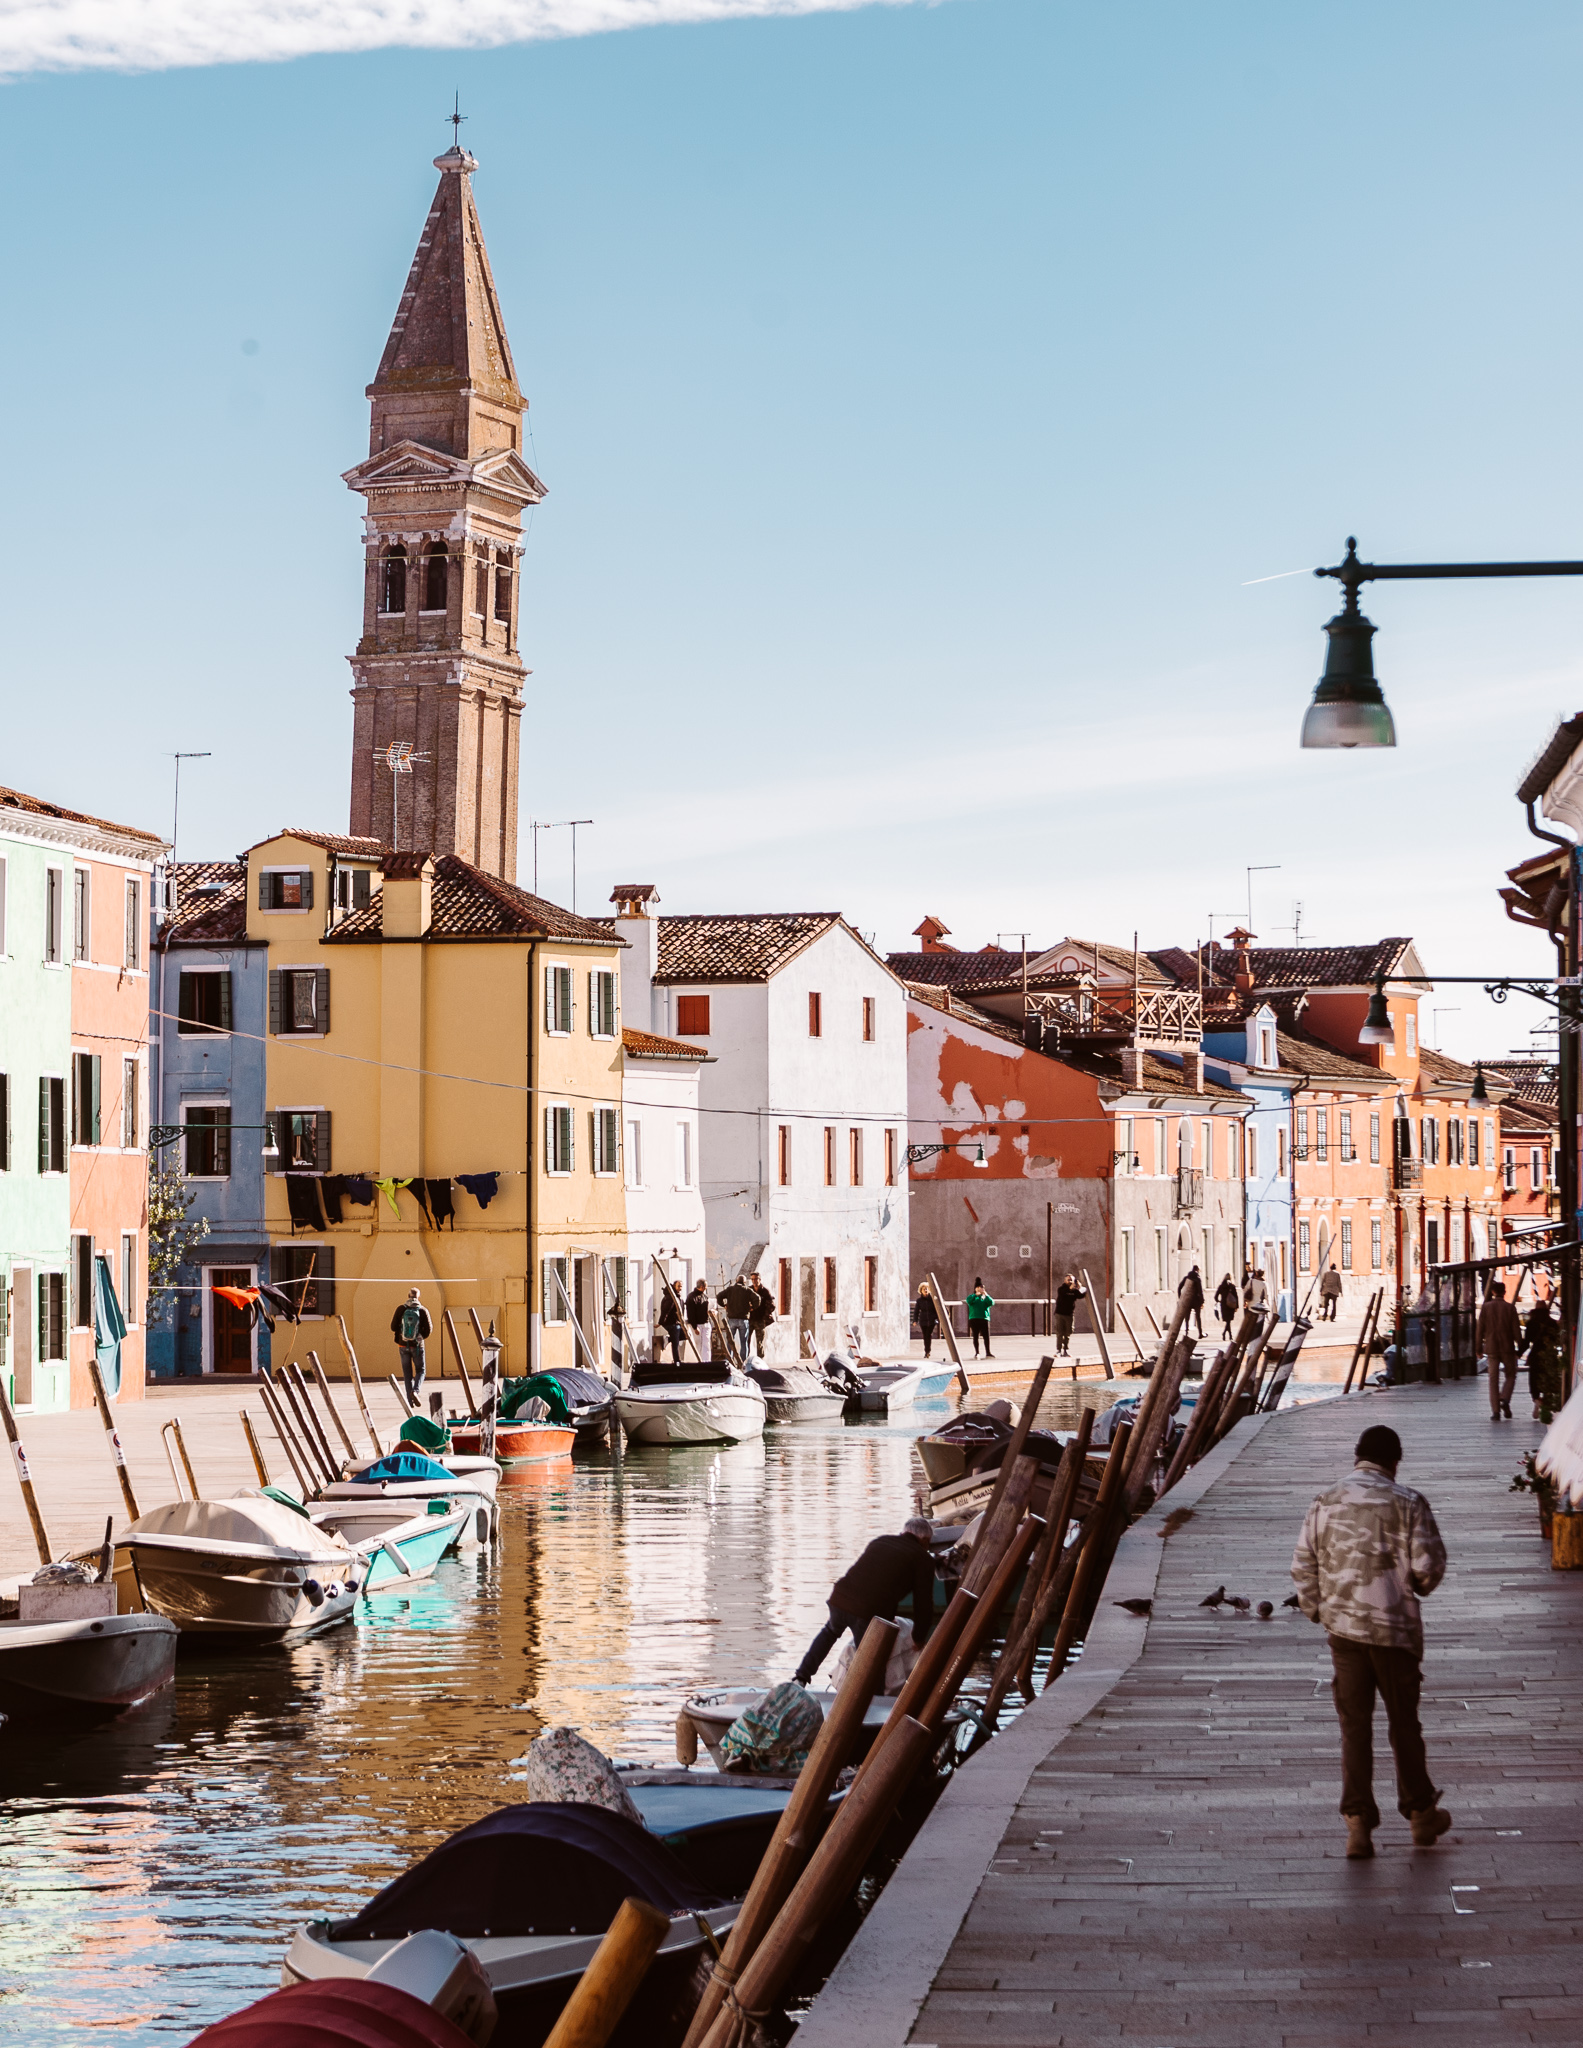 visiting nearby islands like Burano make venice worth visiitng